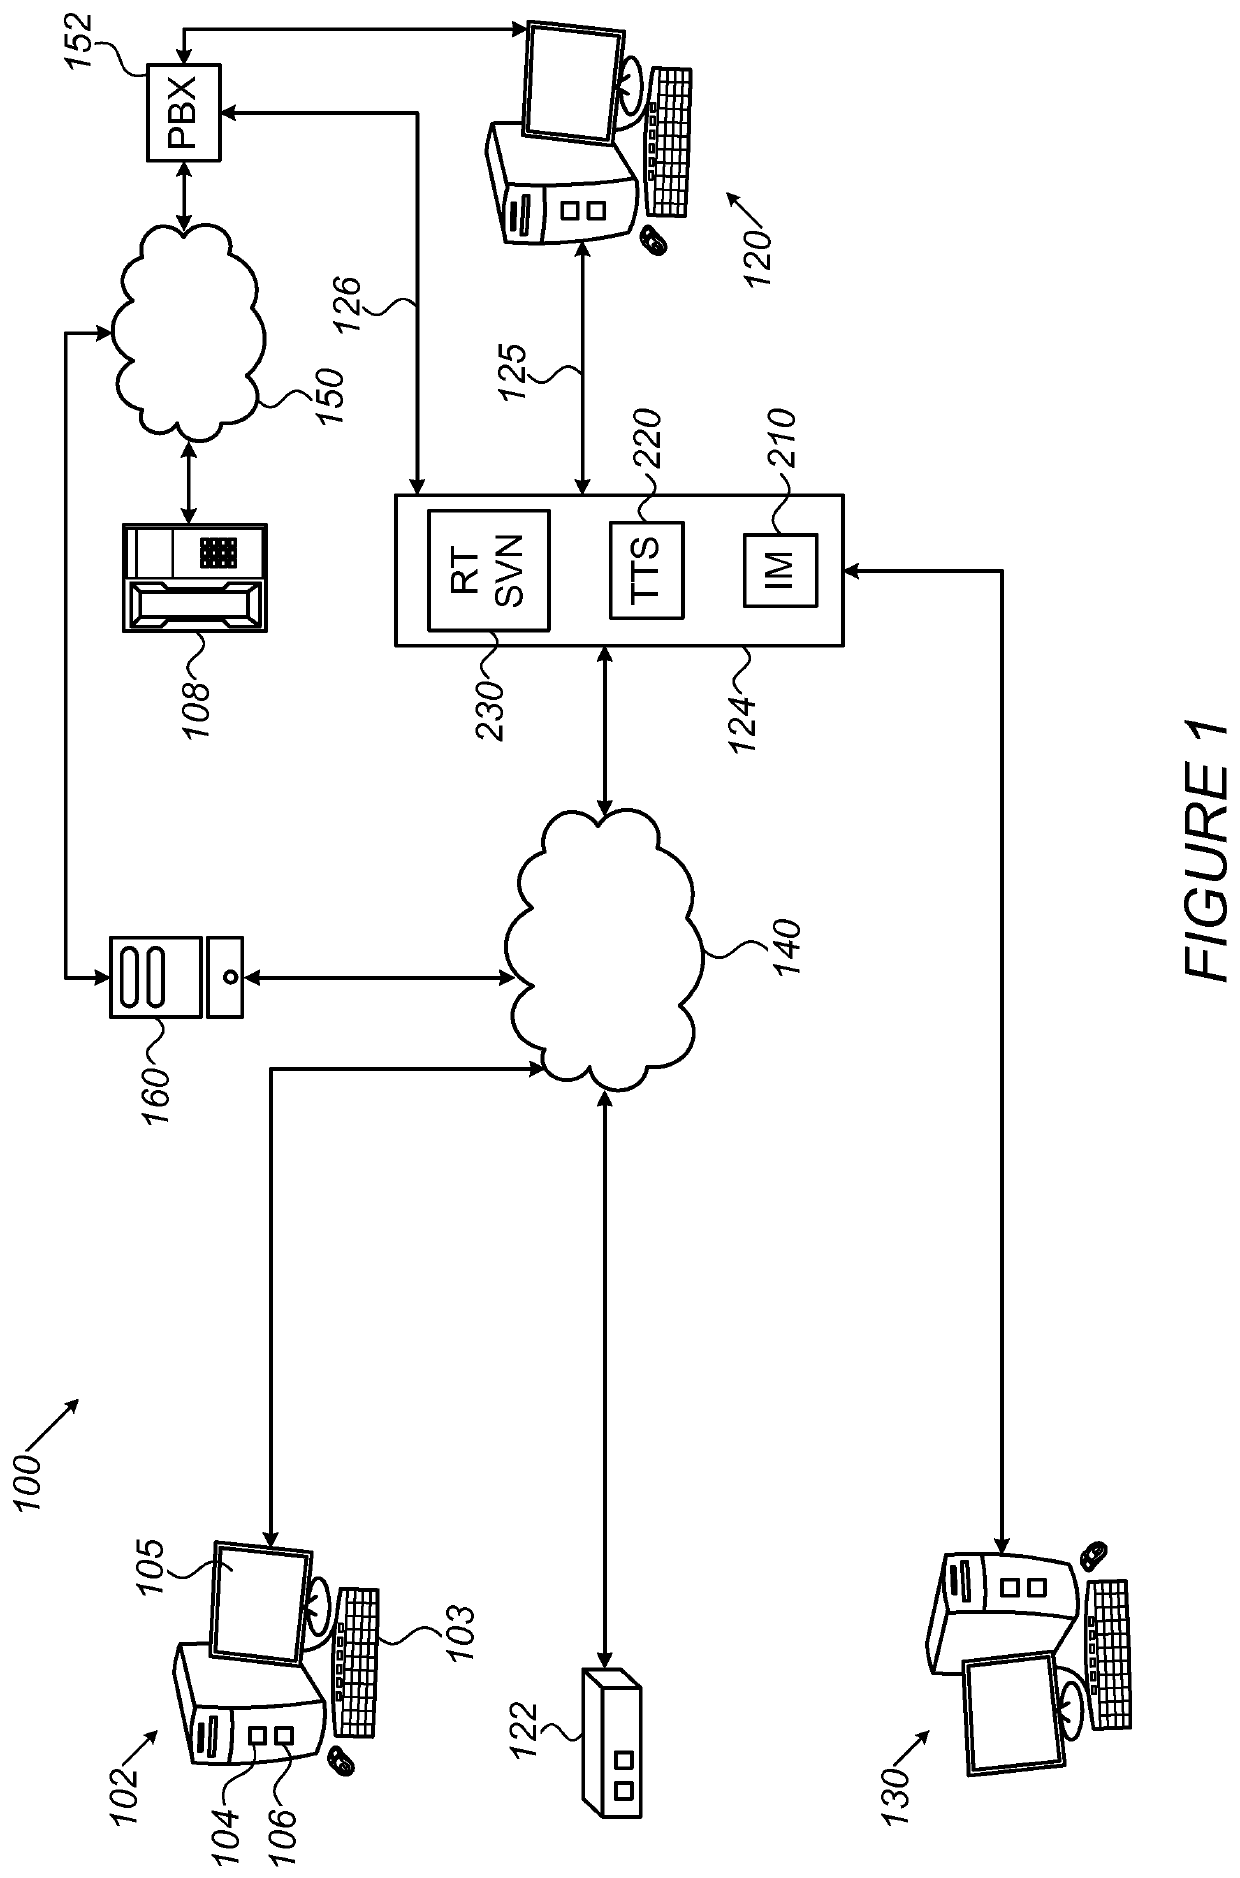 Device, system and method for summarizing agreements